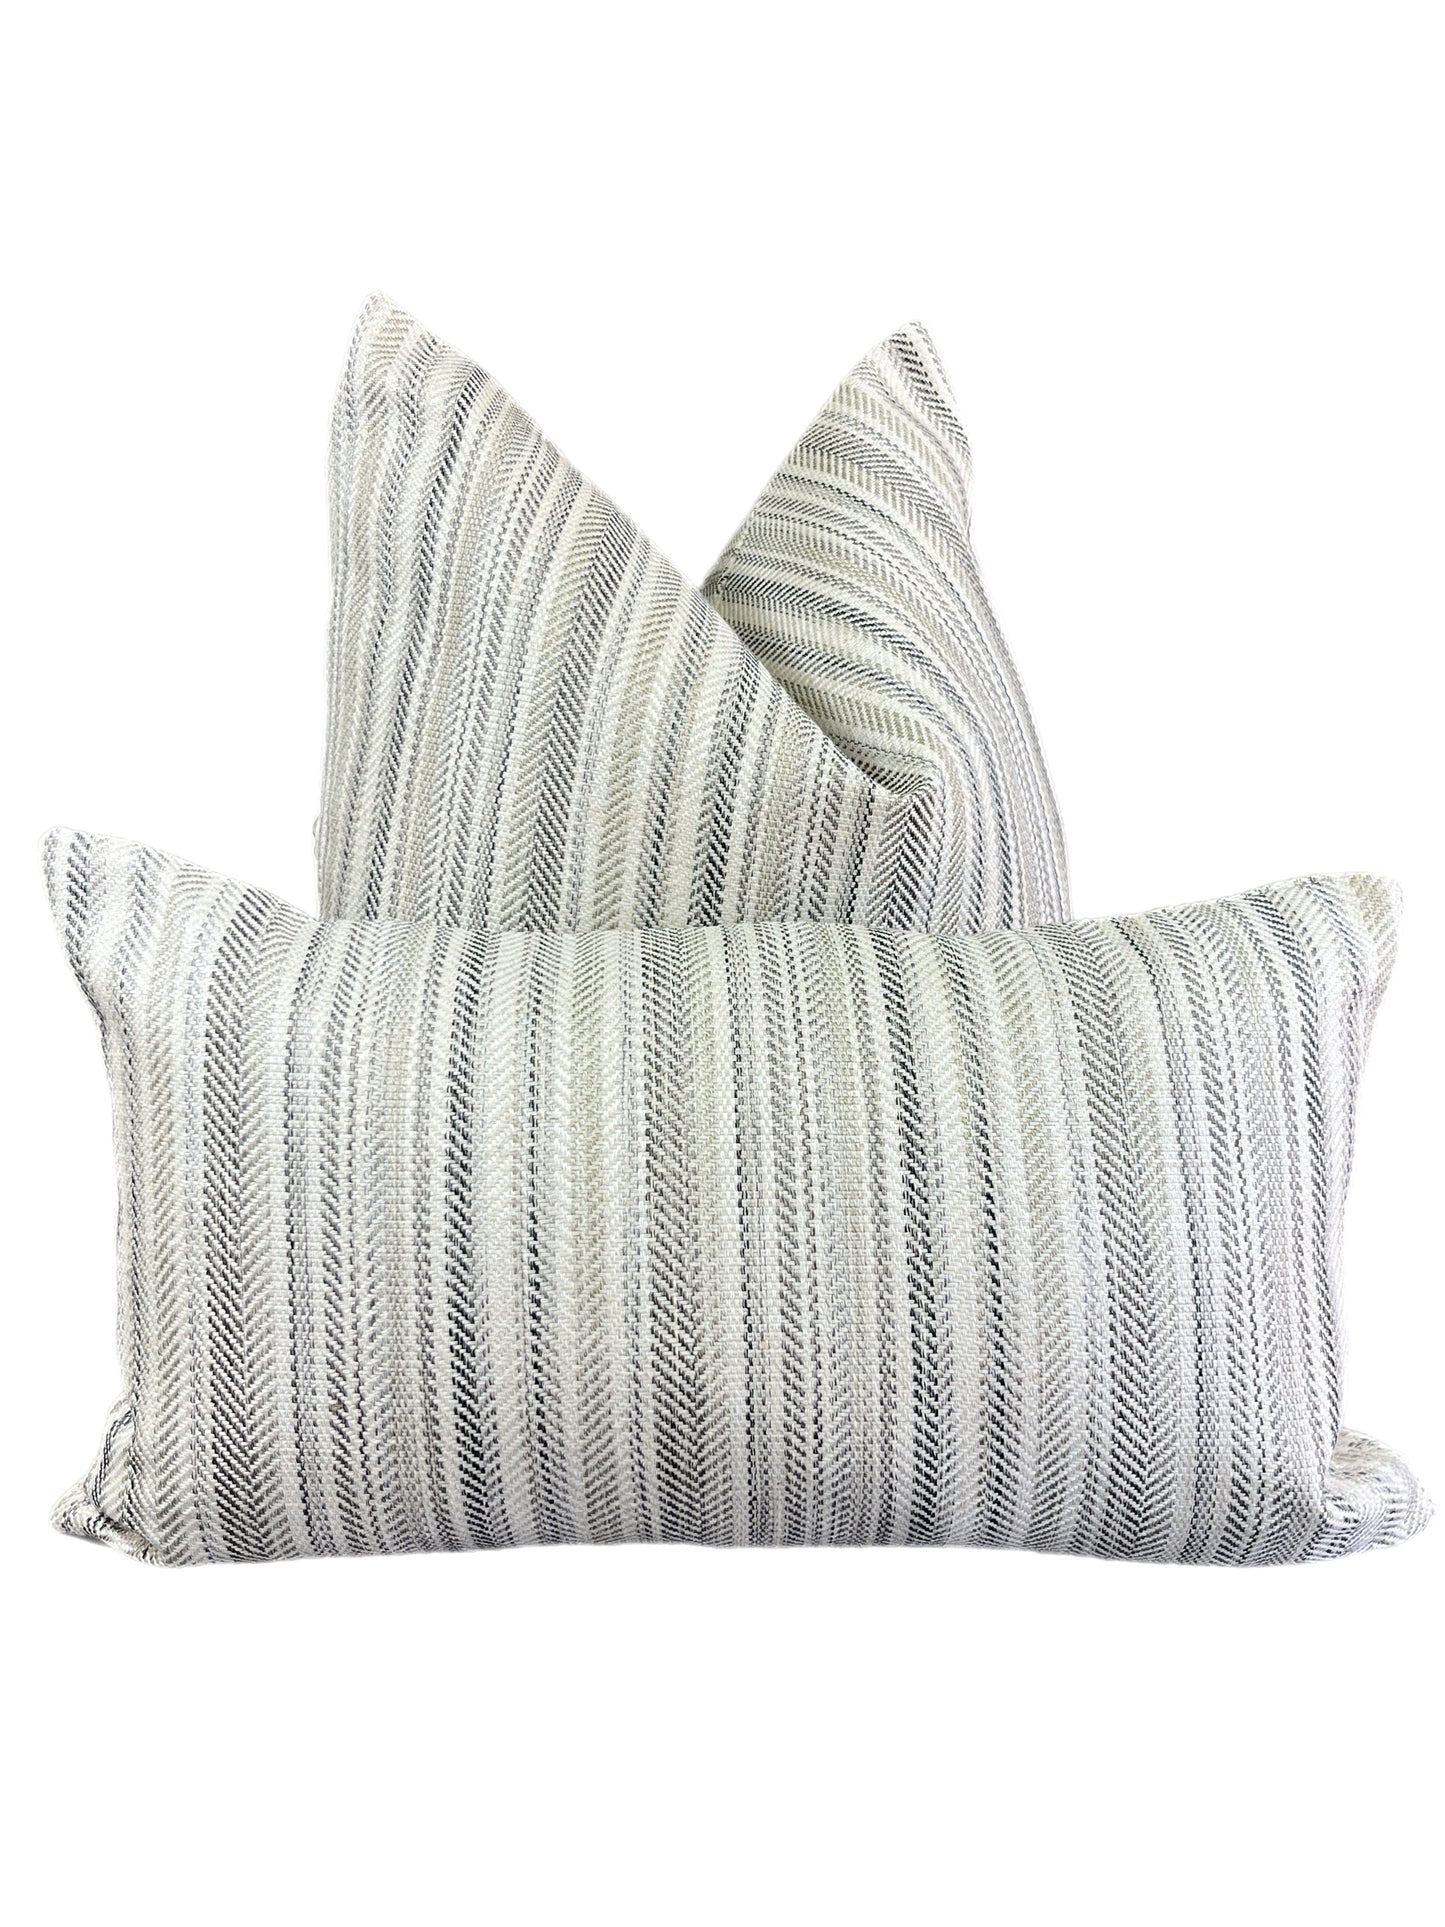 Luxury Pillow - 24" x 24" - Pearl Woven-Pewter; Pearlescent woven fabric in a stunning pewter gray